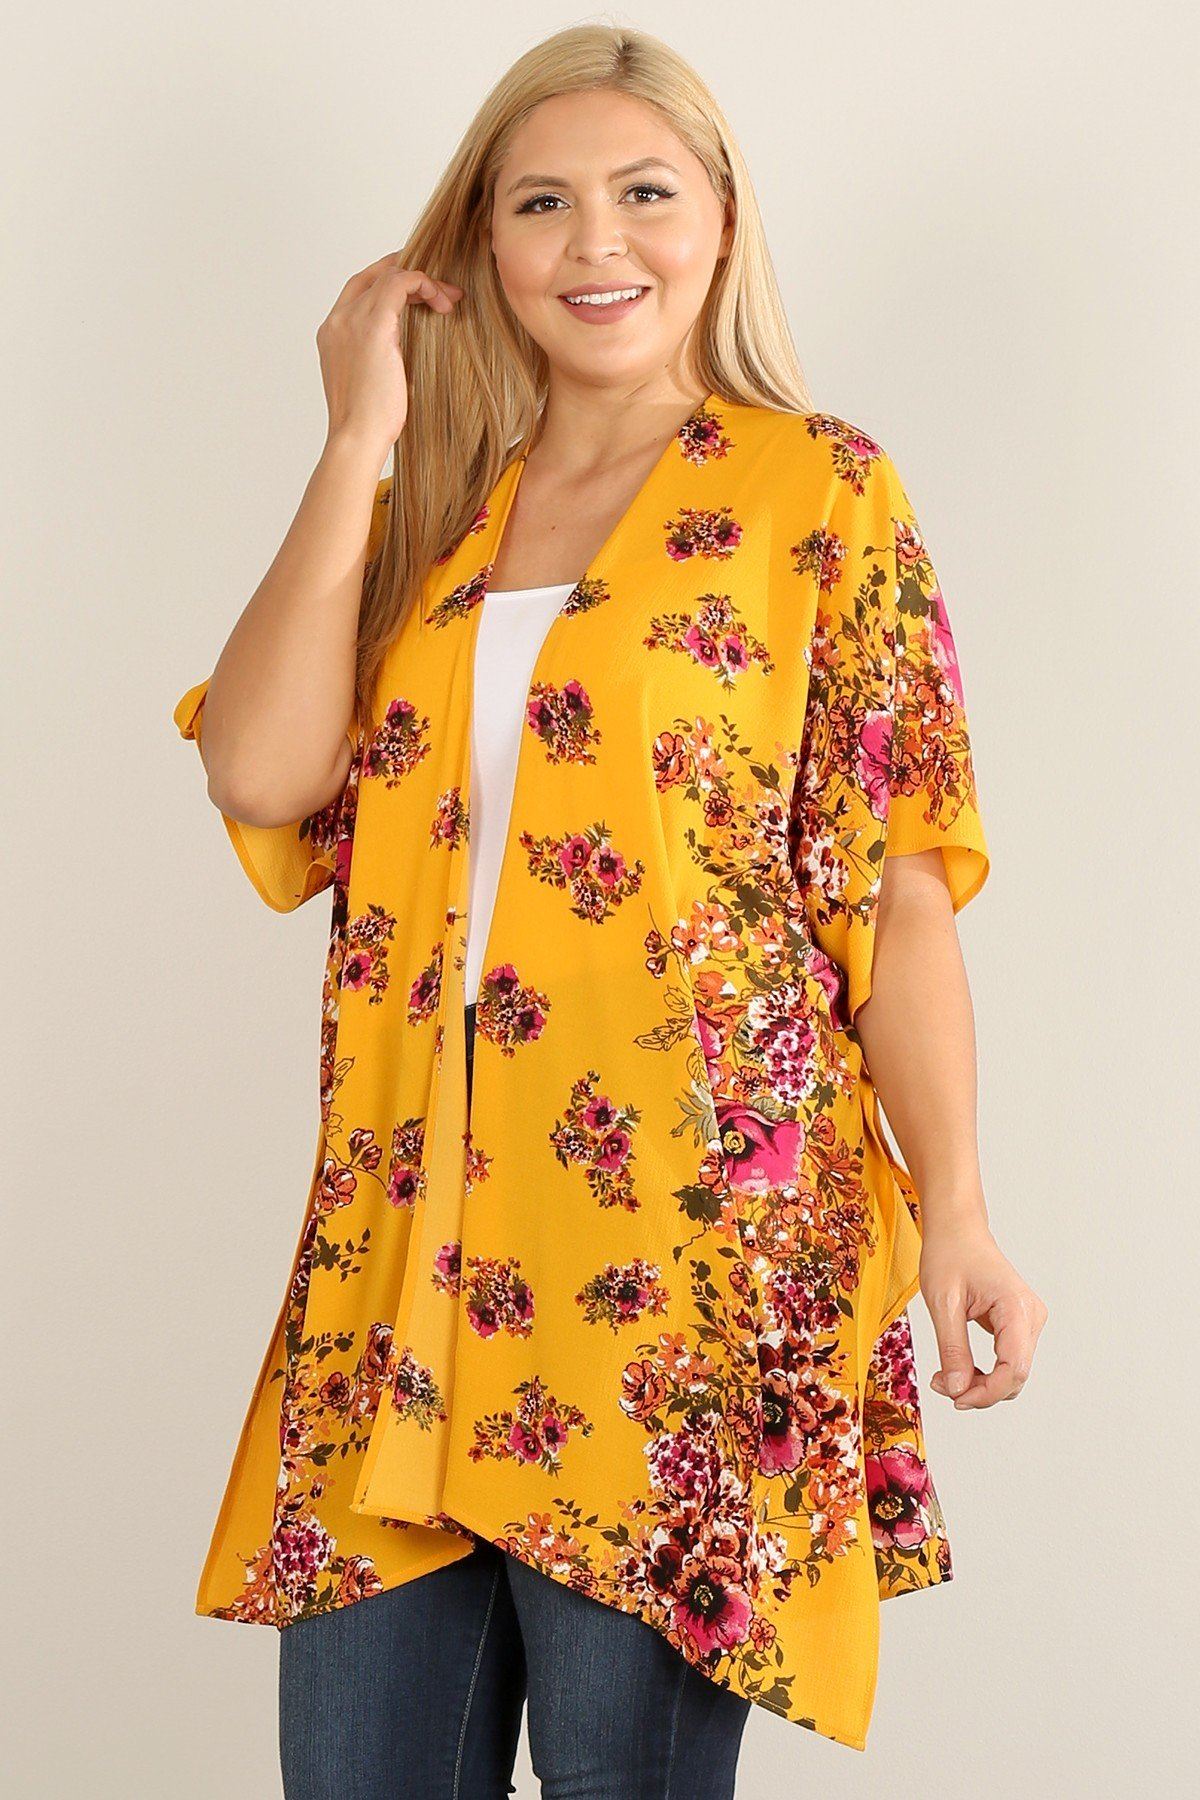 Plus Size Lovely Ladies Polyester Blend Made In U.S.A. Floral Print Kimono Asymmetric Hem Open Front Dolman Sleeves (Mustard)